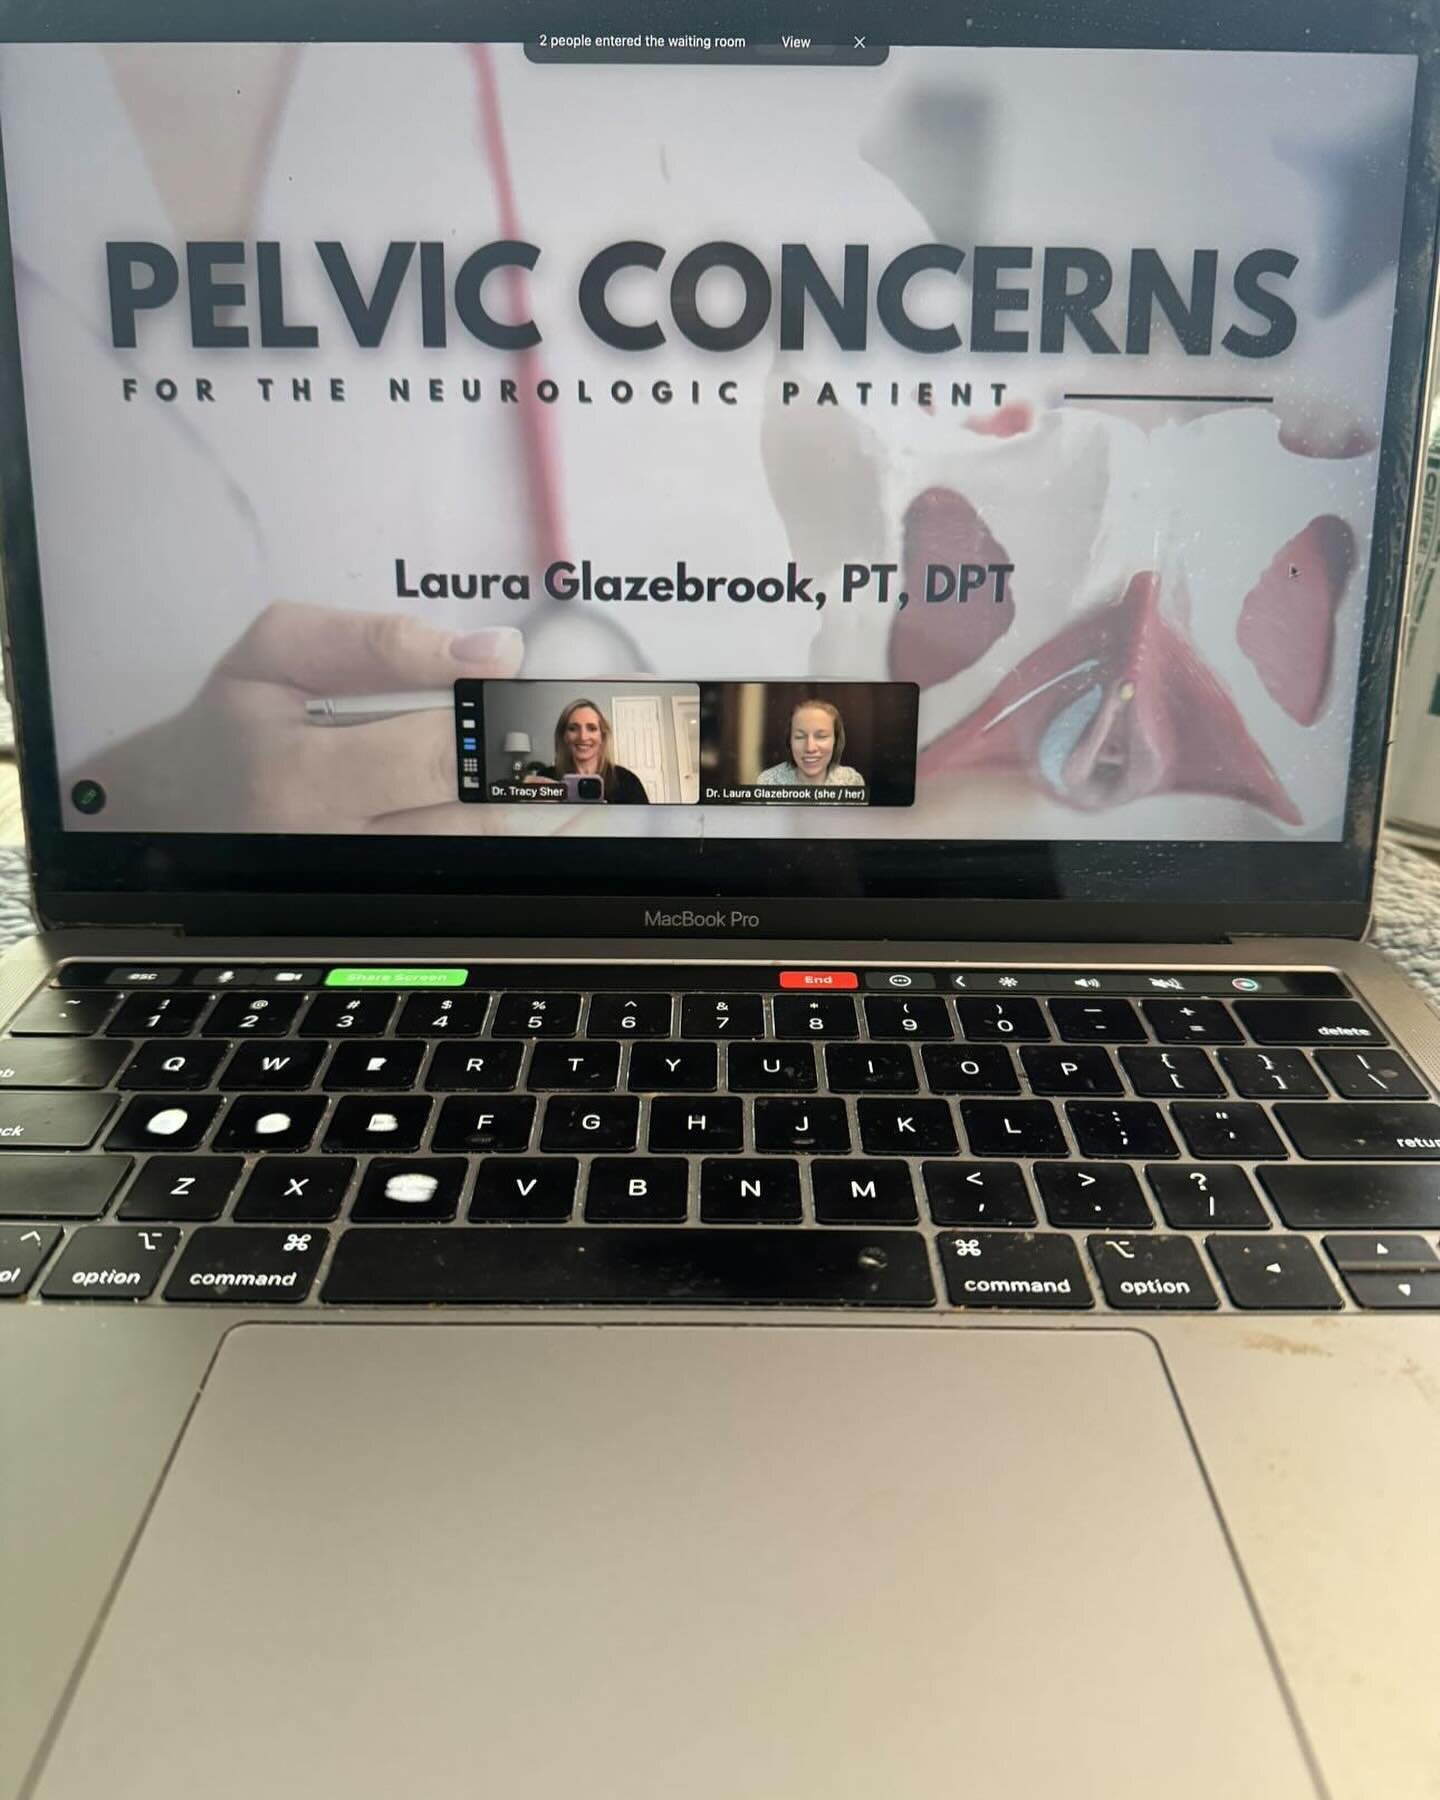 My first two therapy loves renewed their wedding vows today 💒 

I was honored to be invited to speak on pelvic health considerations for those with neurological conditions by the incomparable @pelvicguru1 for her @pelvicguru_official community. 

[O